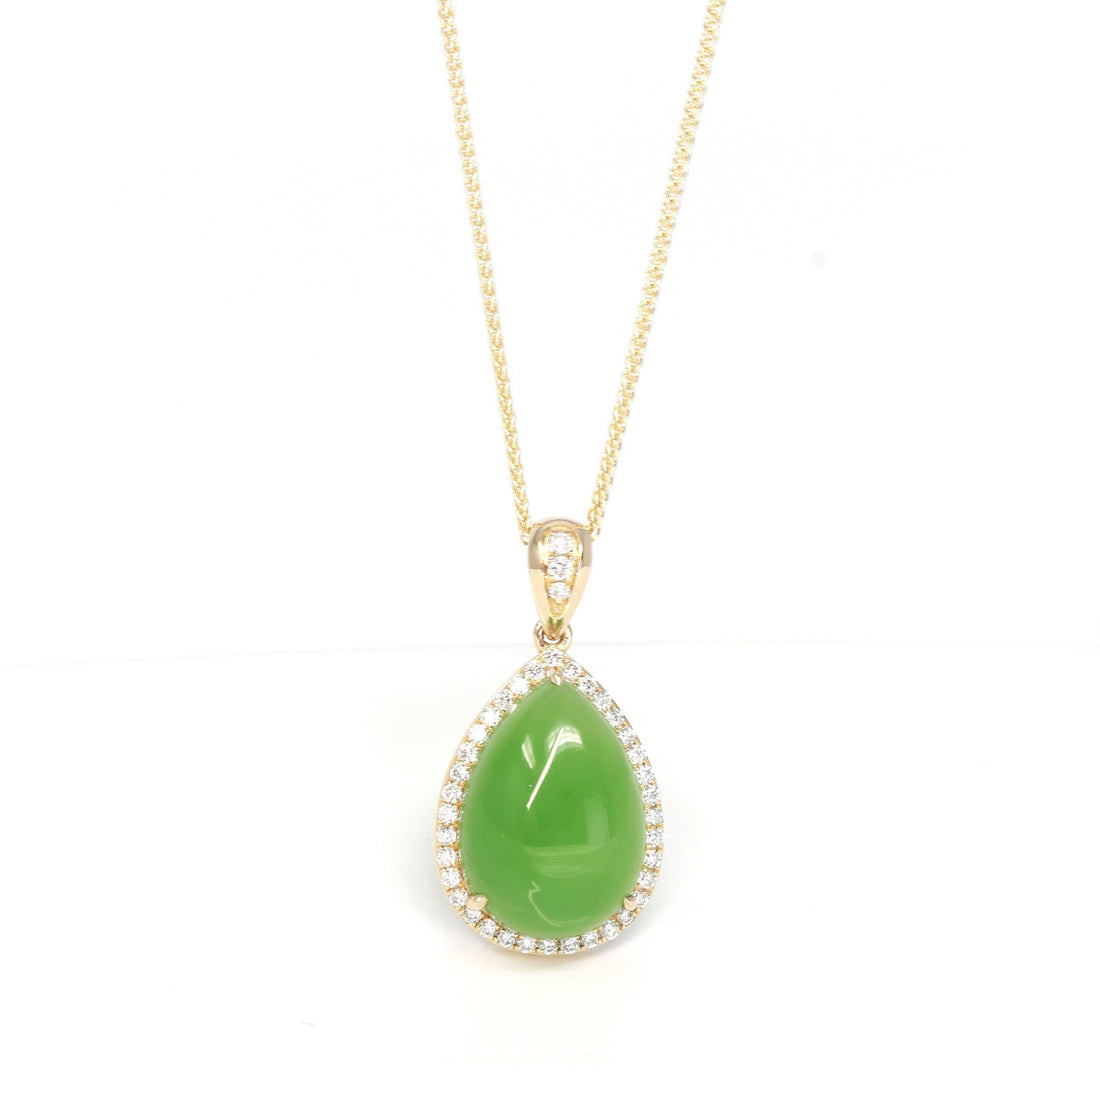 Baikalla Jewelry Gold Jade Pendant With Yellow Gold Chain / Large 14K Gold Genuine Green Apple Green Jade Tear Drop Pendant Necklace With VS1 Diamond